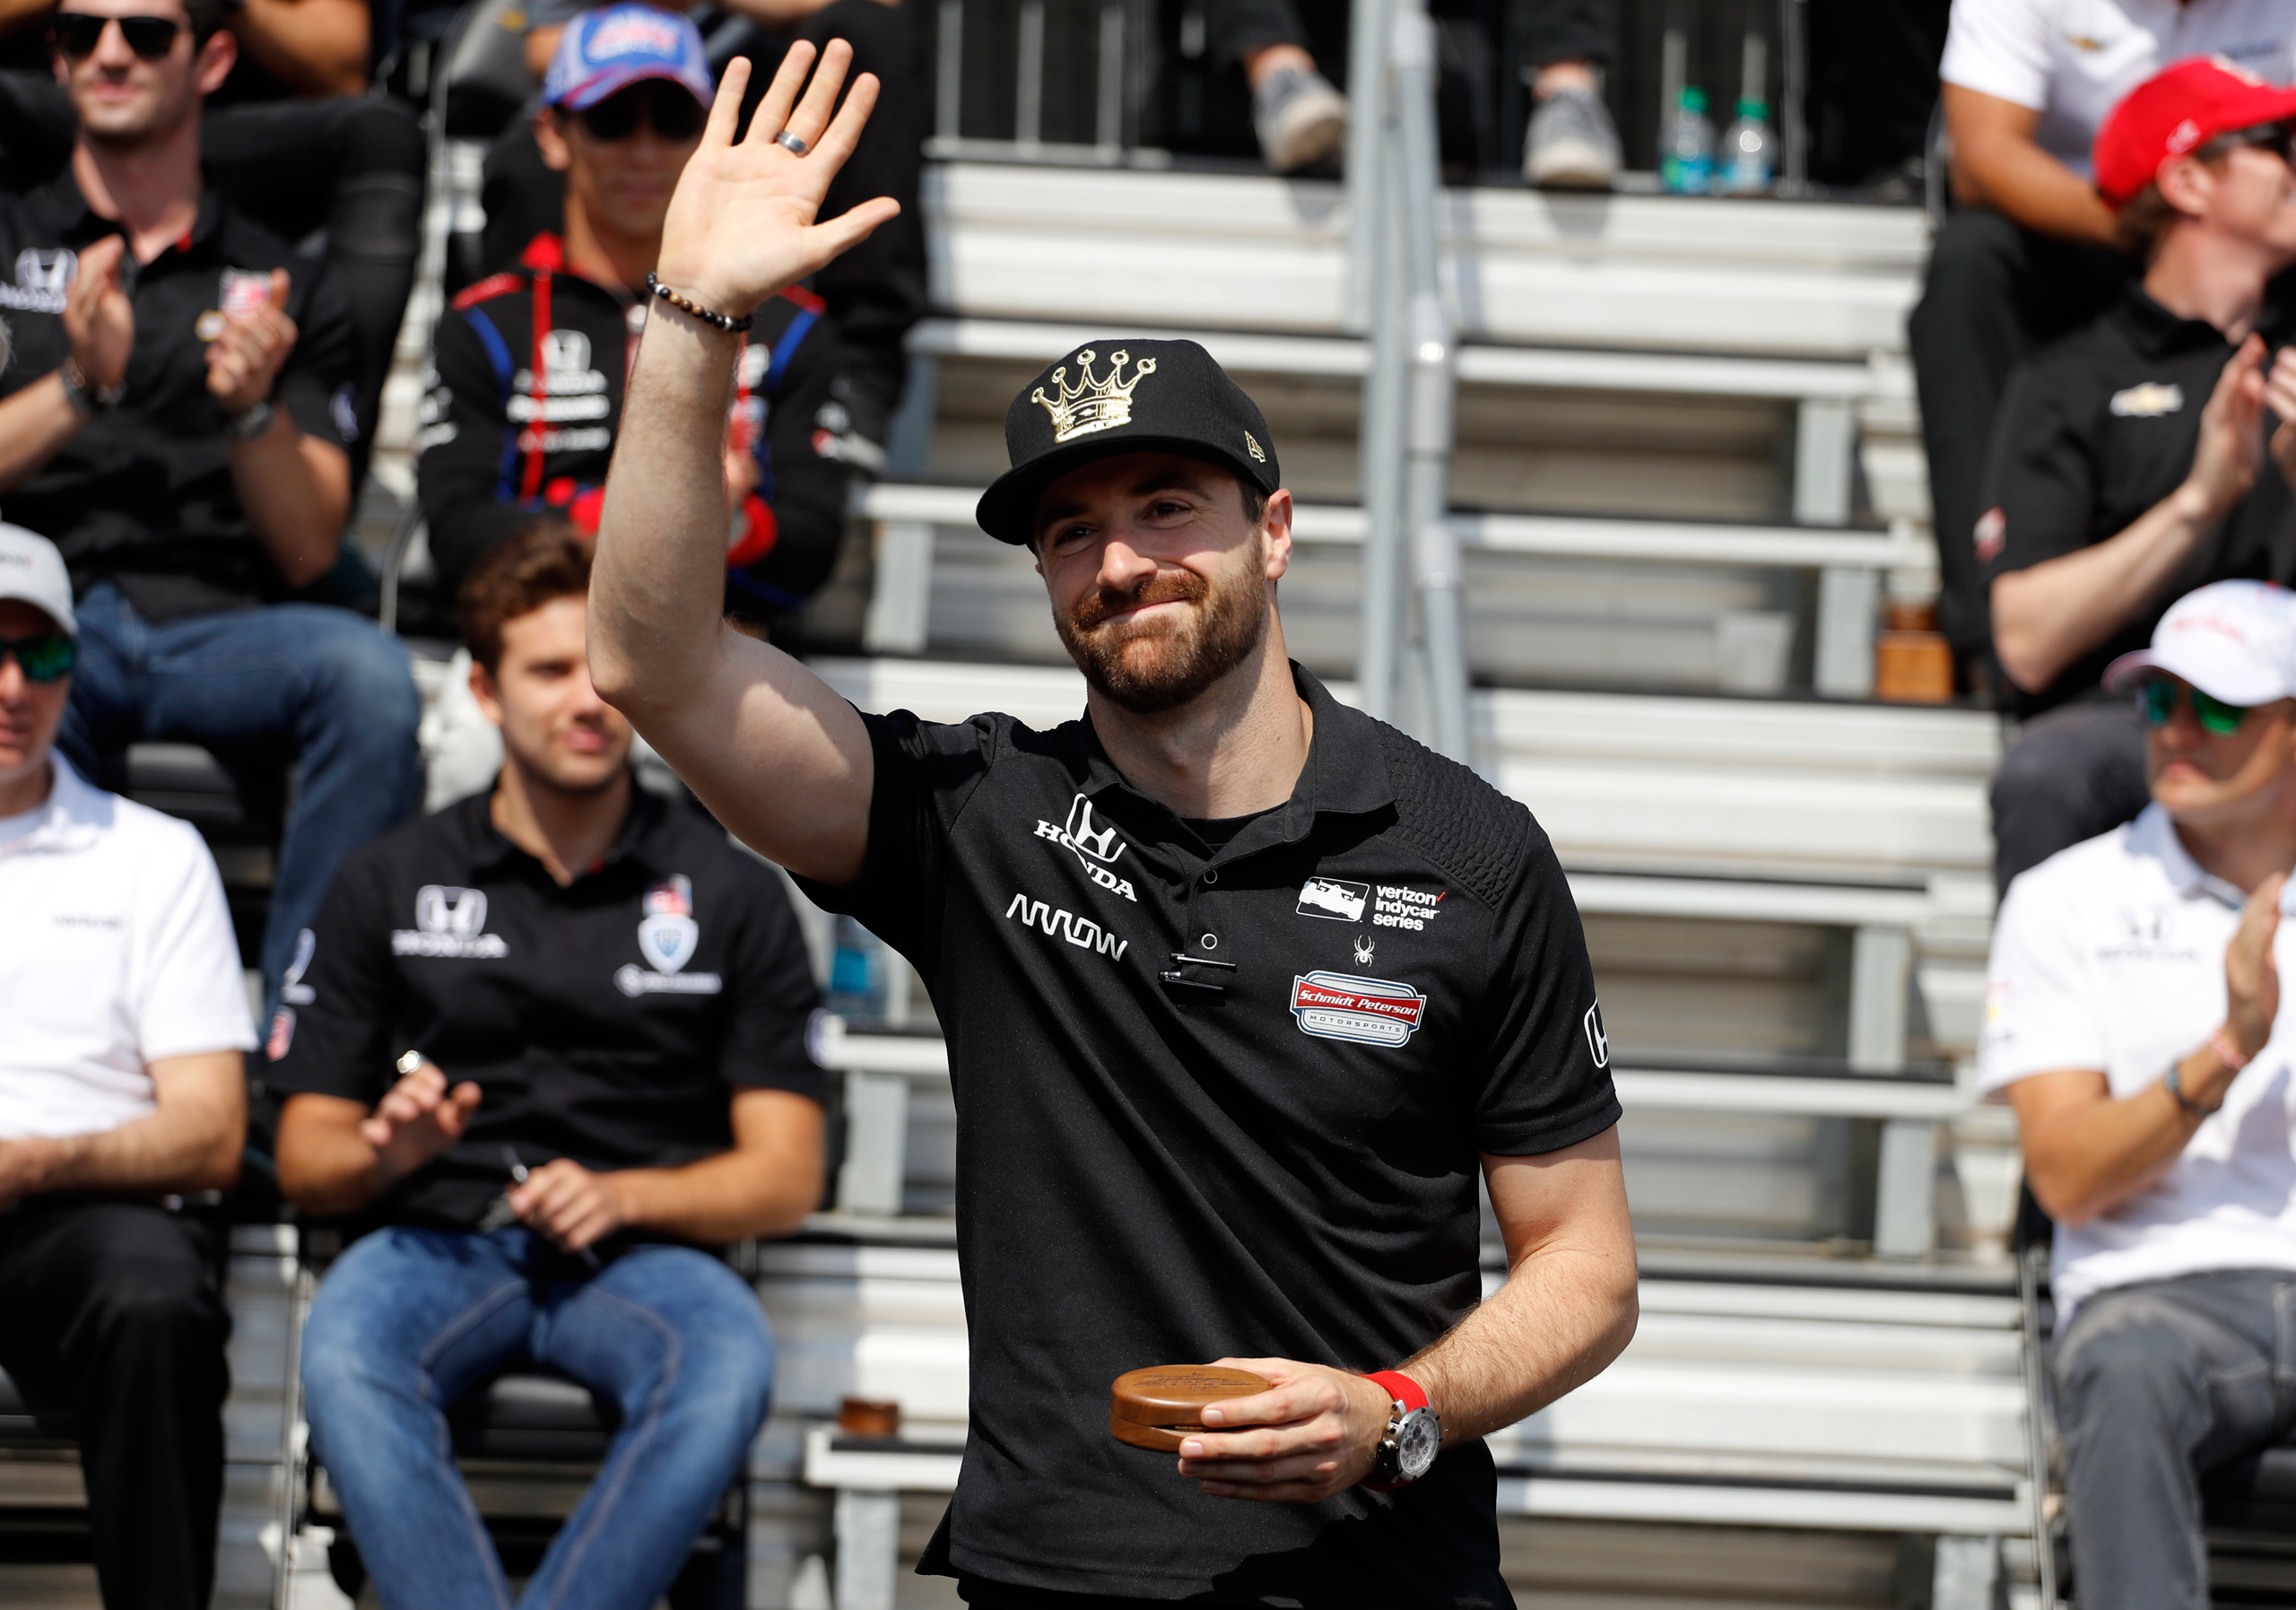 Pole sitter James Hinchcliffe, of Canada, waves to fans during the drivers meeting for the Indianapolis 500 auto race at Indianapolis Motor Speedway in Indianapolis on May 28, 2016. (Jeff Roberson—AP)